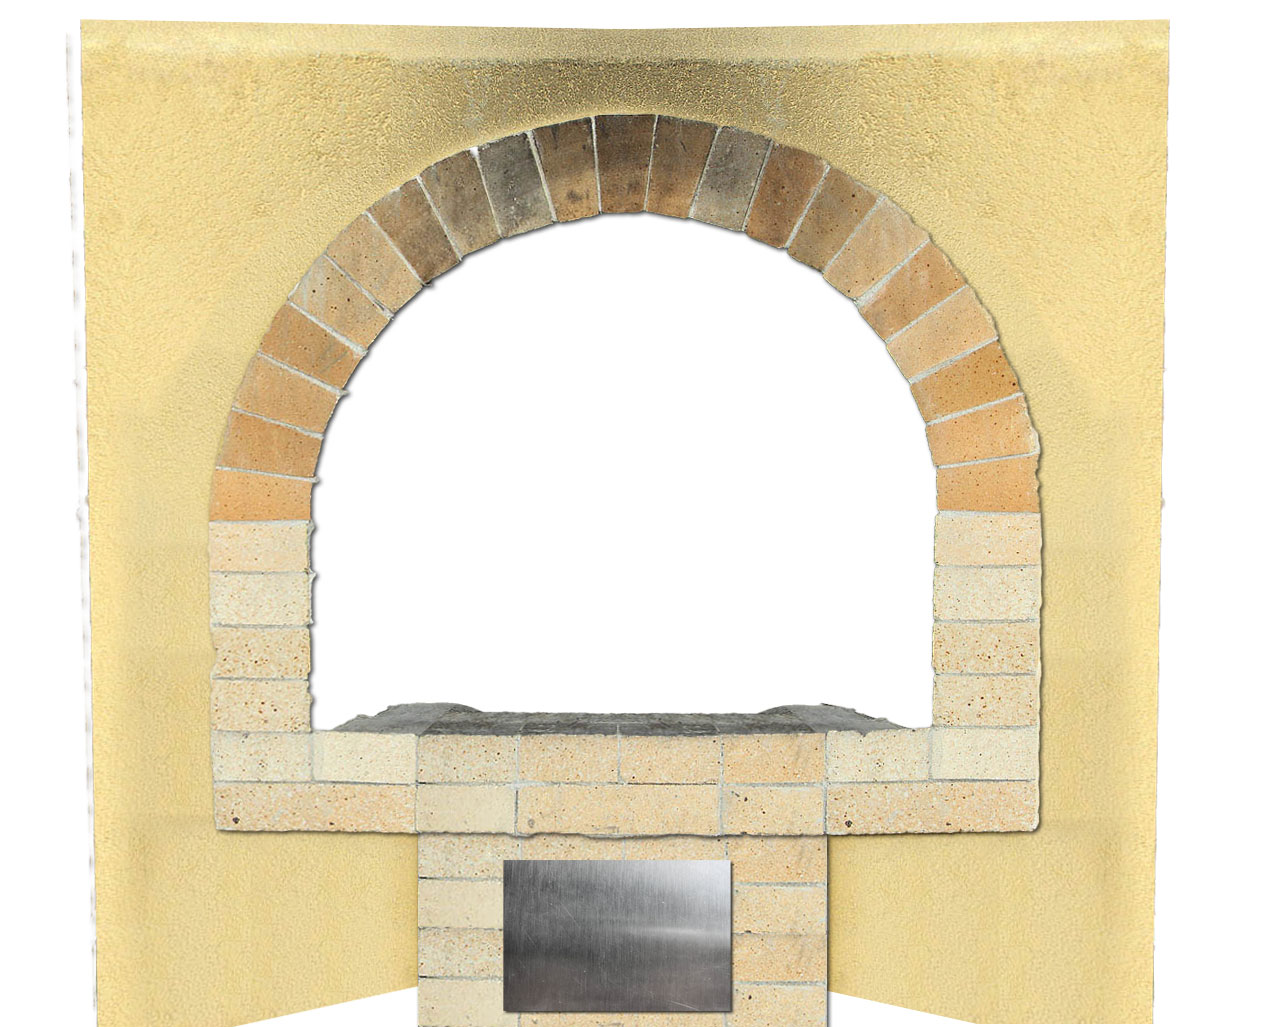 wall-oven-front-shot-01.jpg